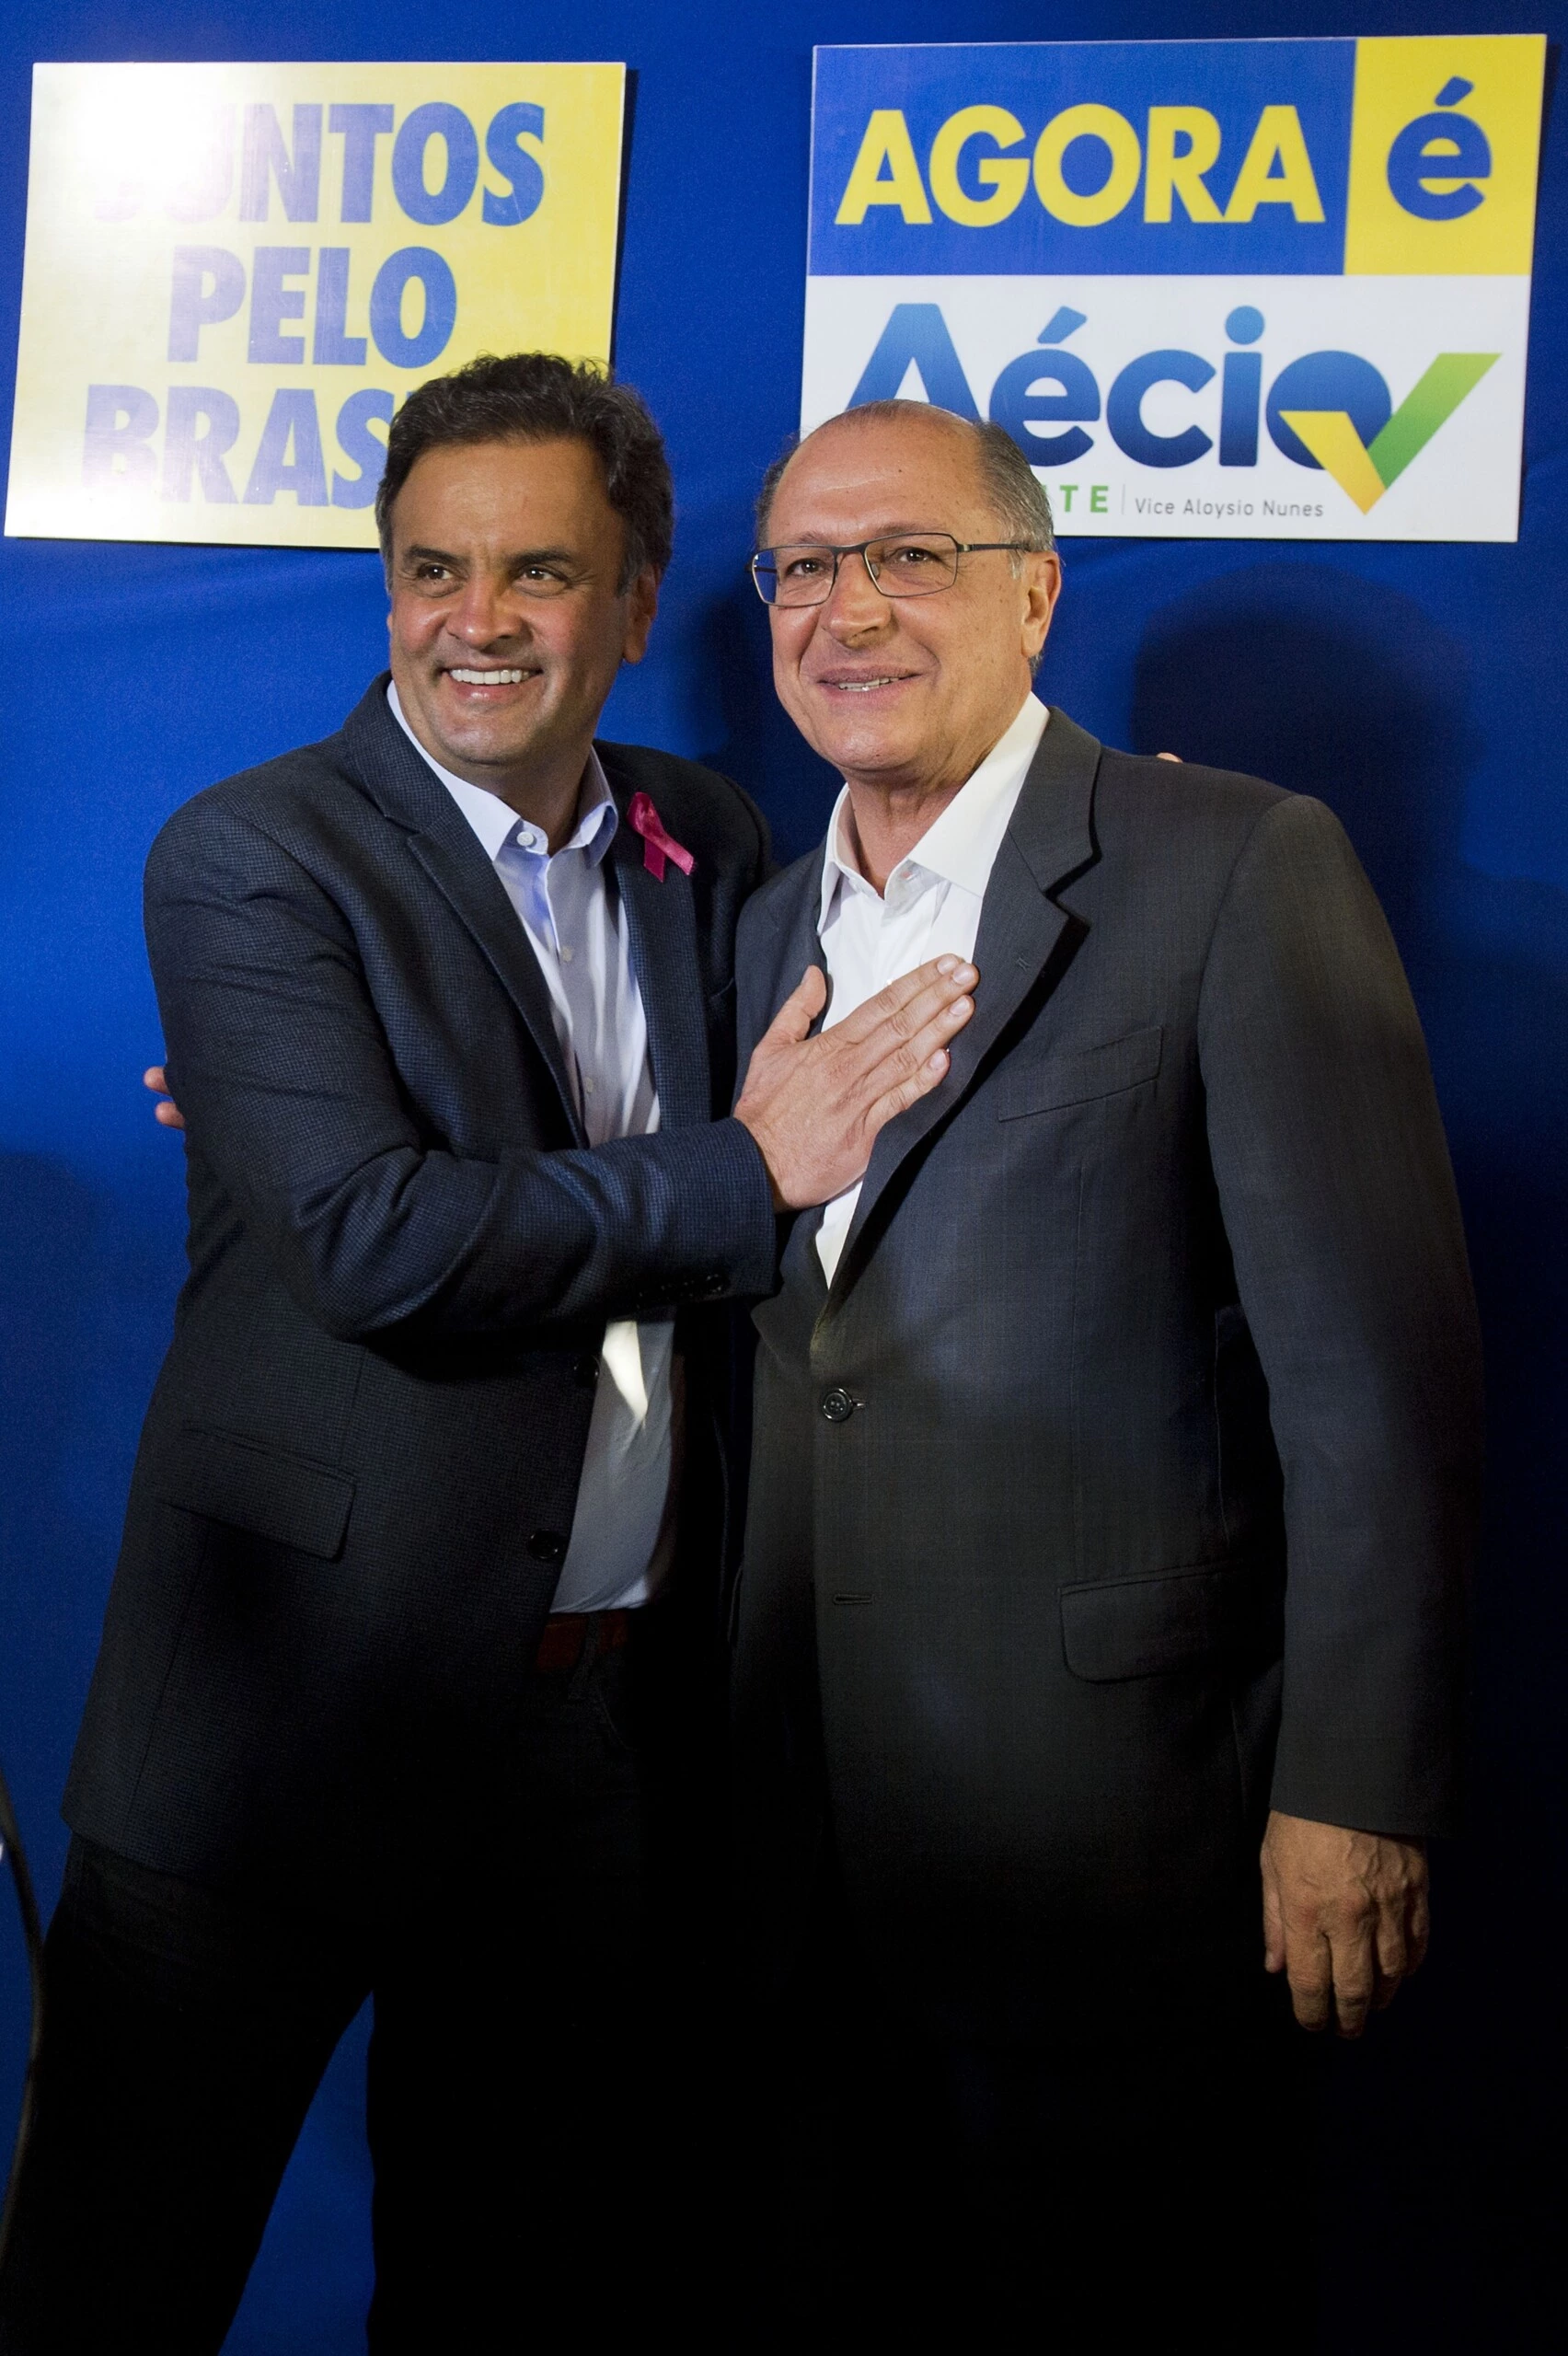 Brazil's presidential candidate for the Brazilian Social Democracy Party (PSDB) Aecio Neves (L) greets Sao Paulo state governor Geraldo Alckmin (R) before a press conference at the campaign committe in Sao Paulo, on October 6, 2014. Aecio Neves will face Dilma Rousseff in a run-off election on October 26. AFP PHOTO / NELSON ALMEIDA        (Photo credit should read NELSON ALMEIDA/AFP/Getty Images)